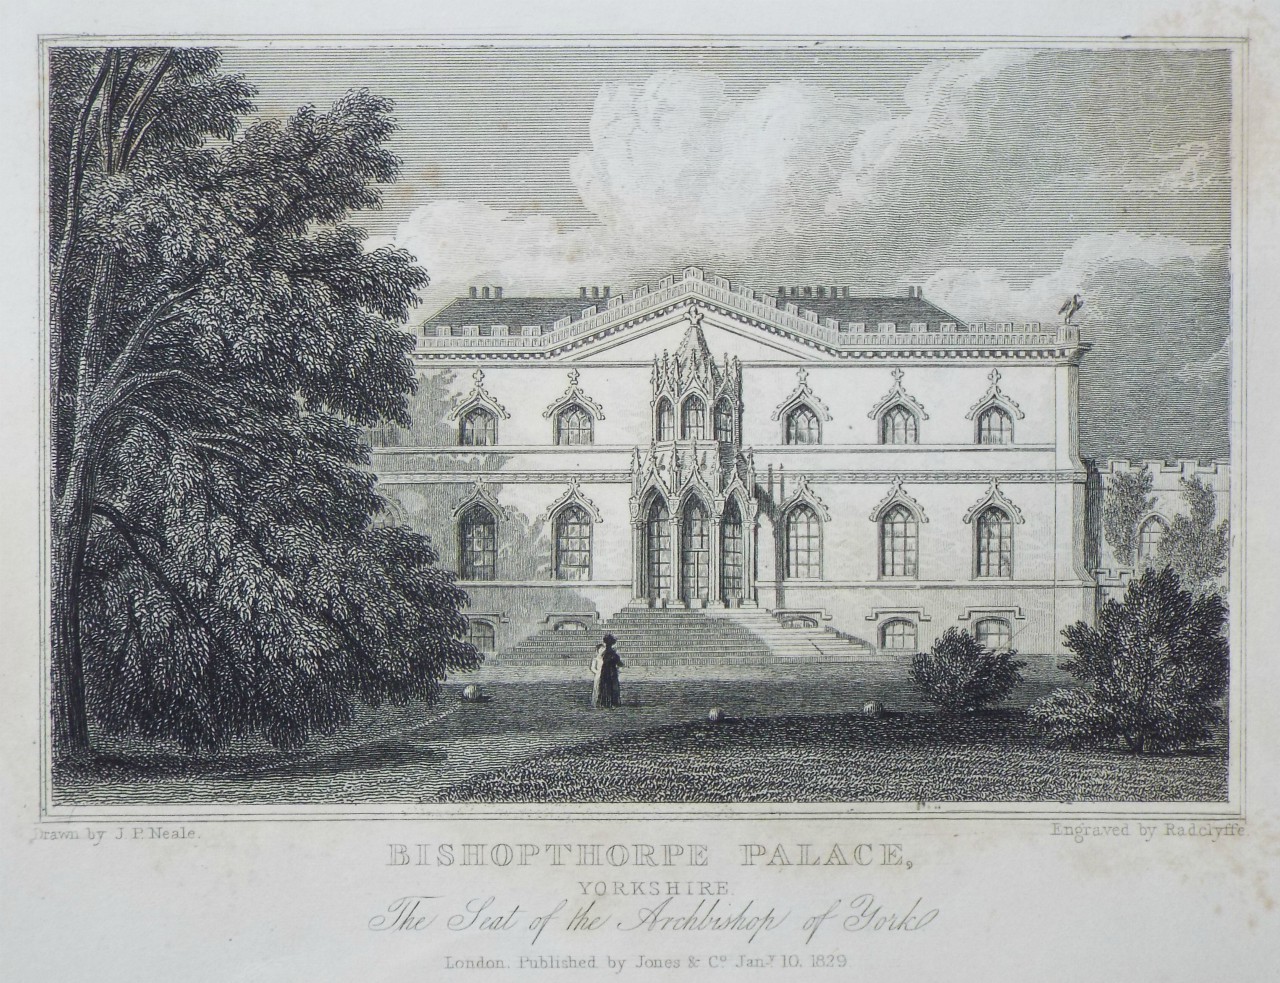 Print - Bishopthorpe Palace, Yorkshire. The Seat of the Archbishop of York. - 